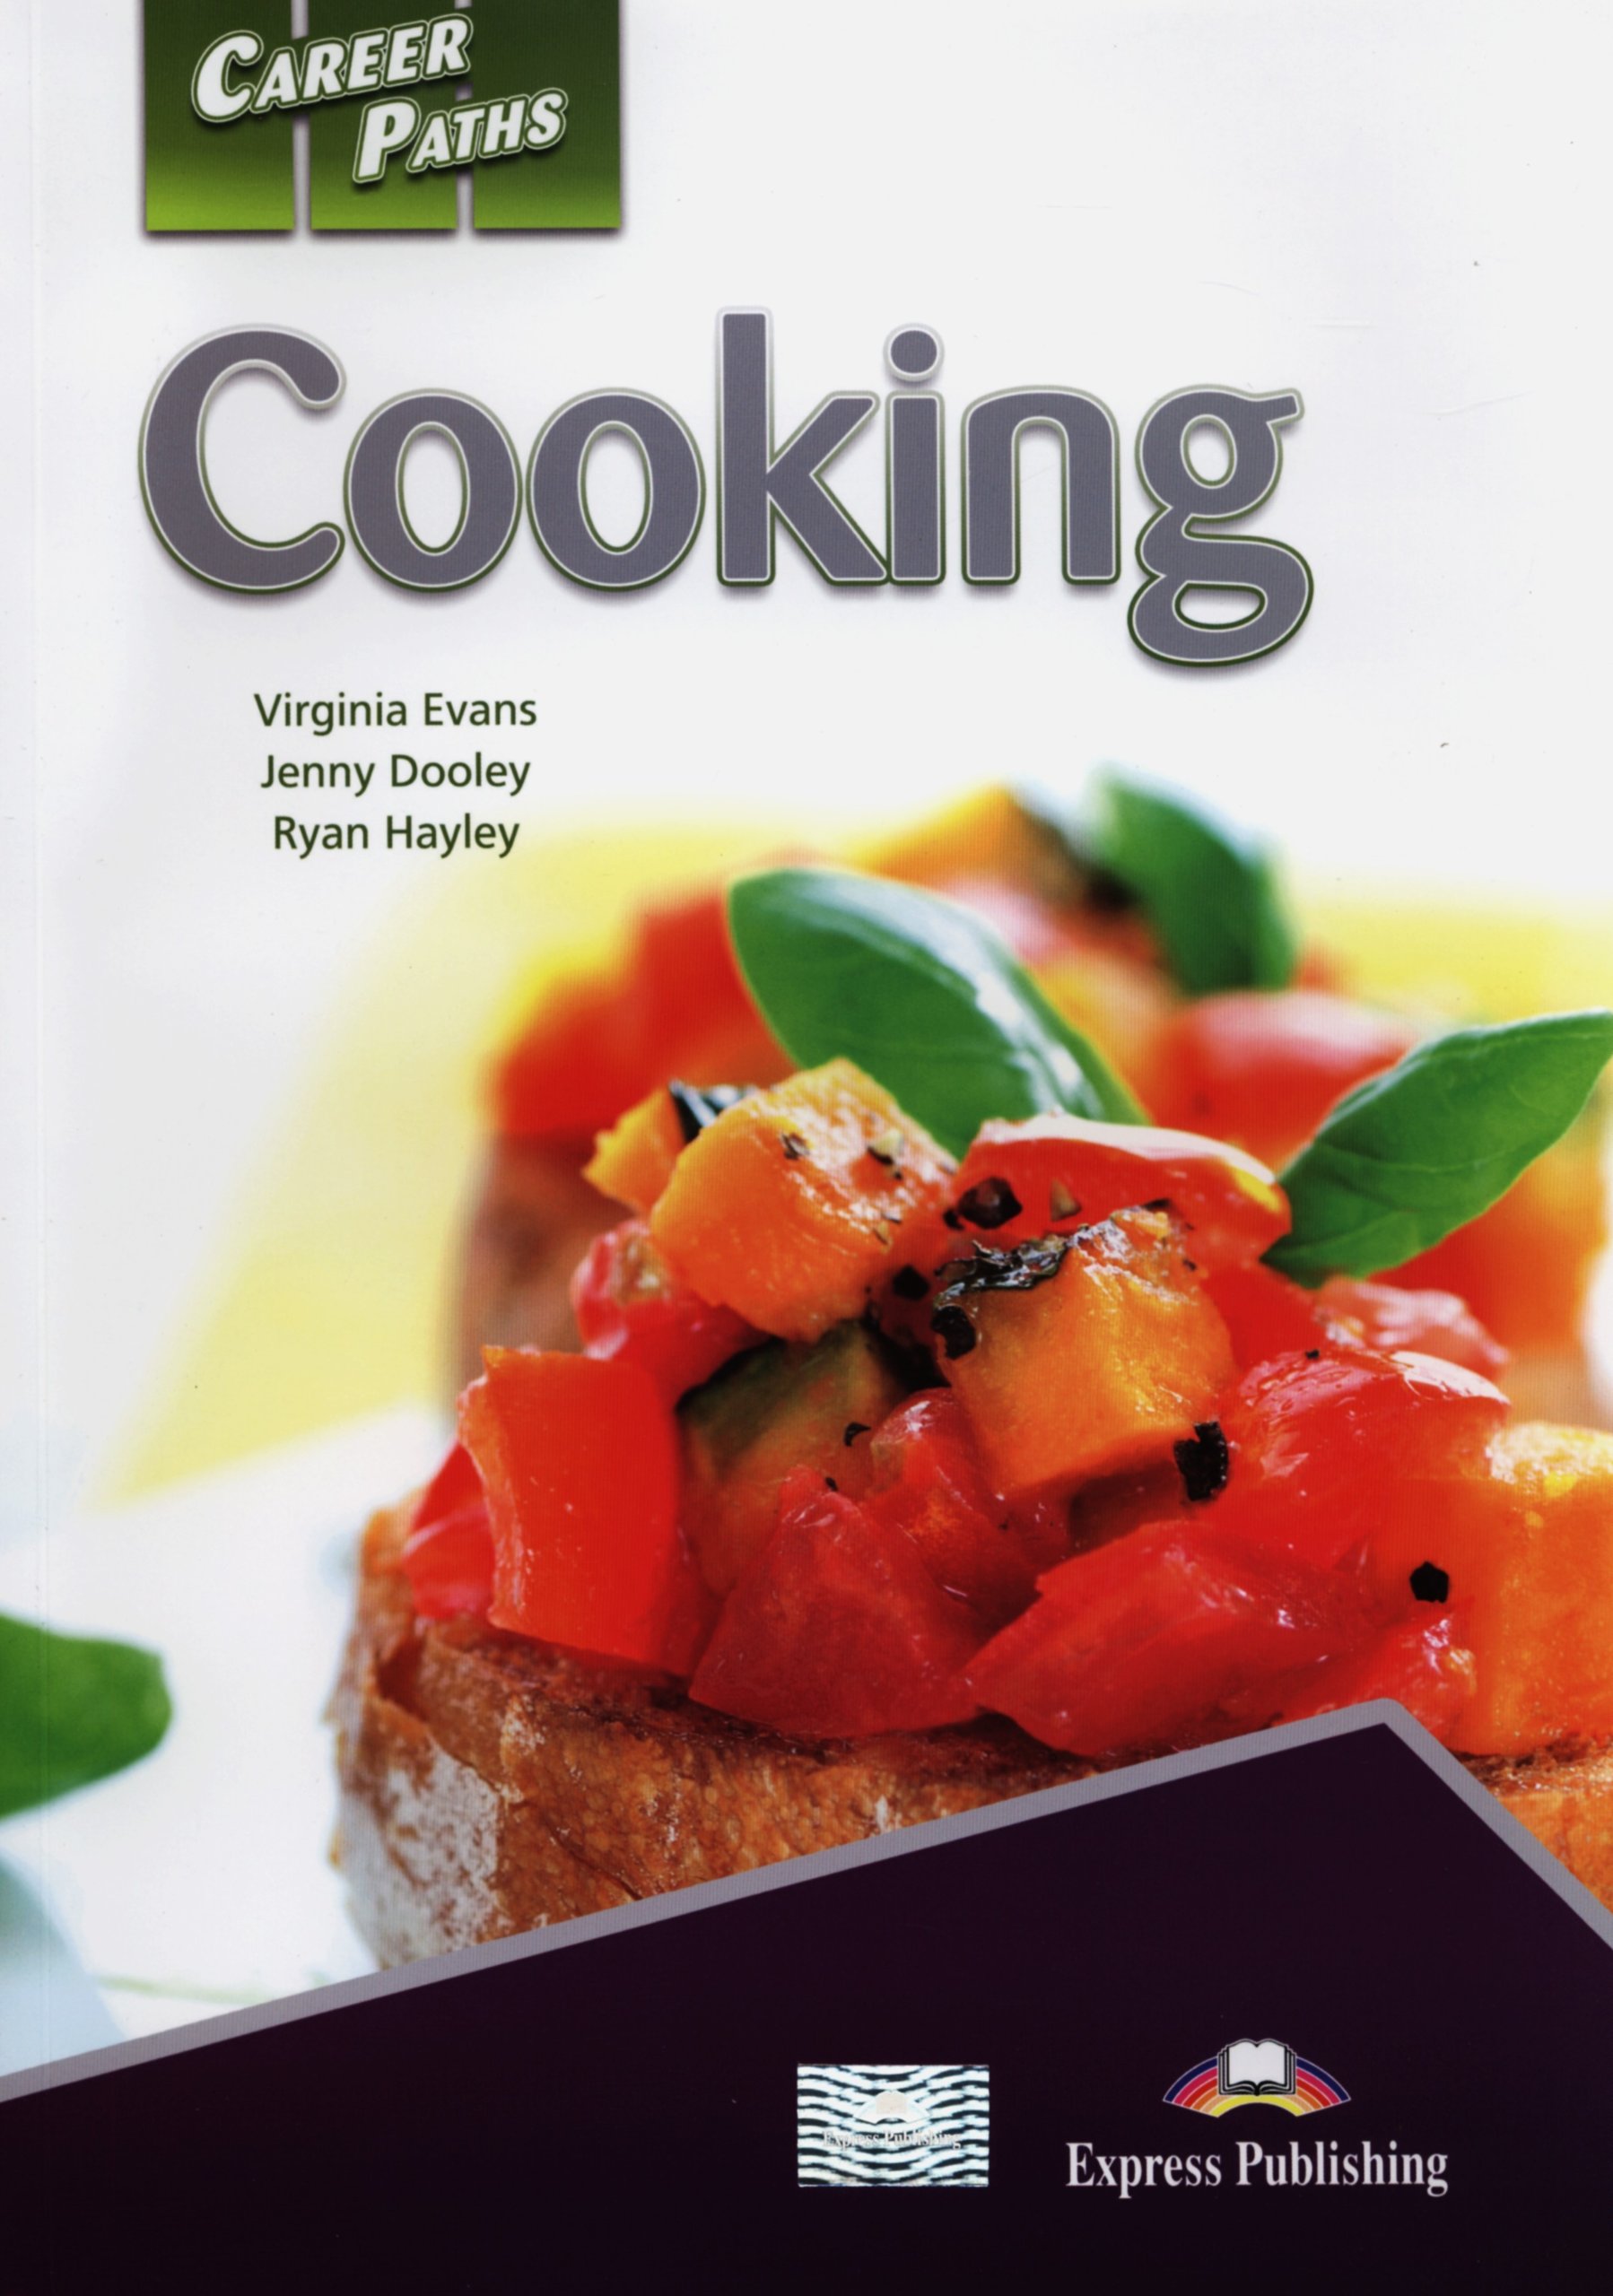 COOKING (CAREER PATHS) Student's Book With Digibook App